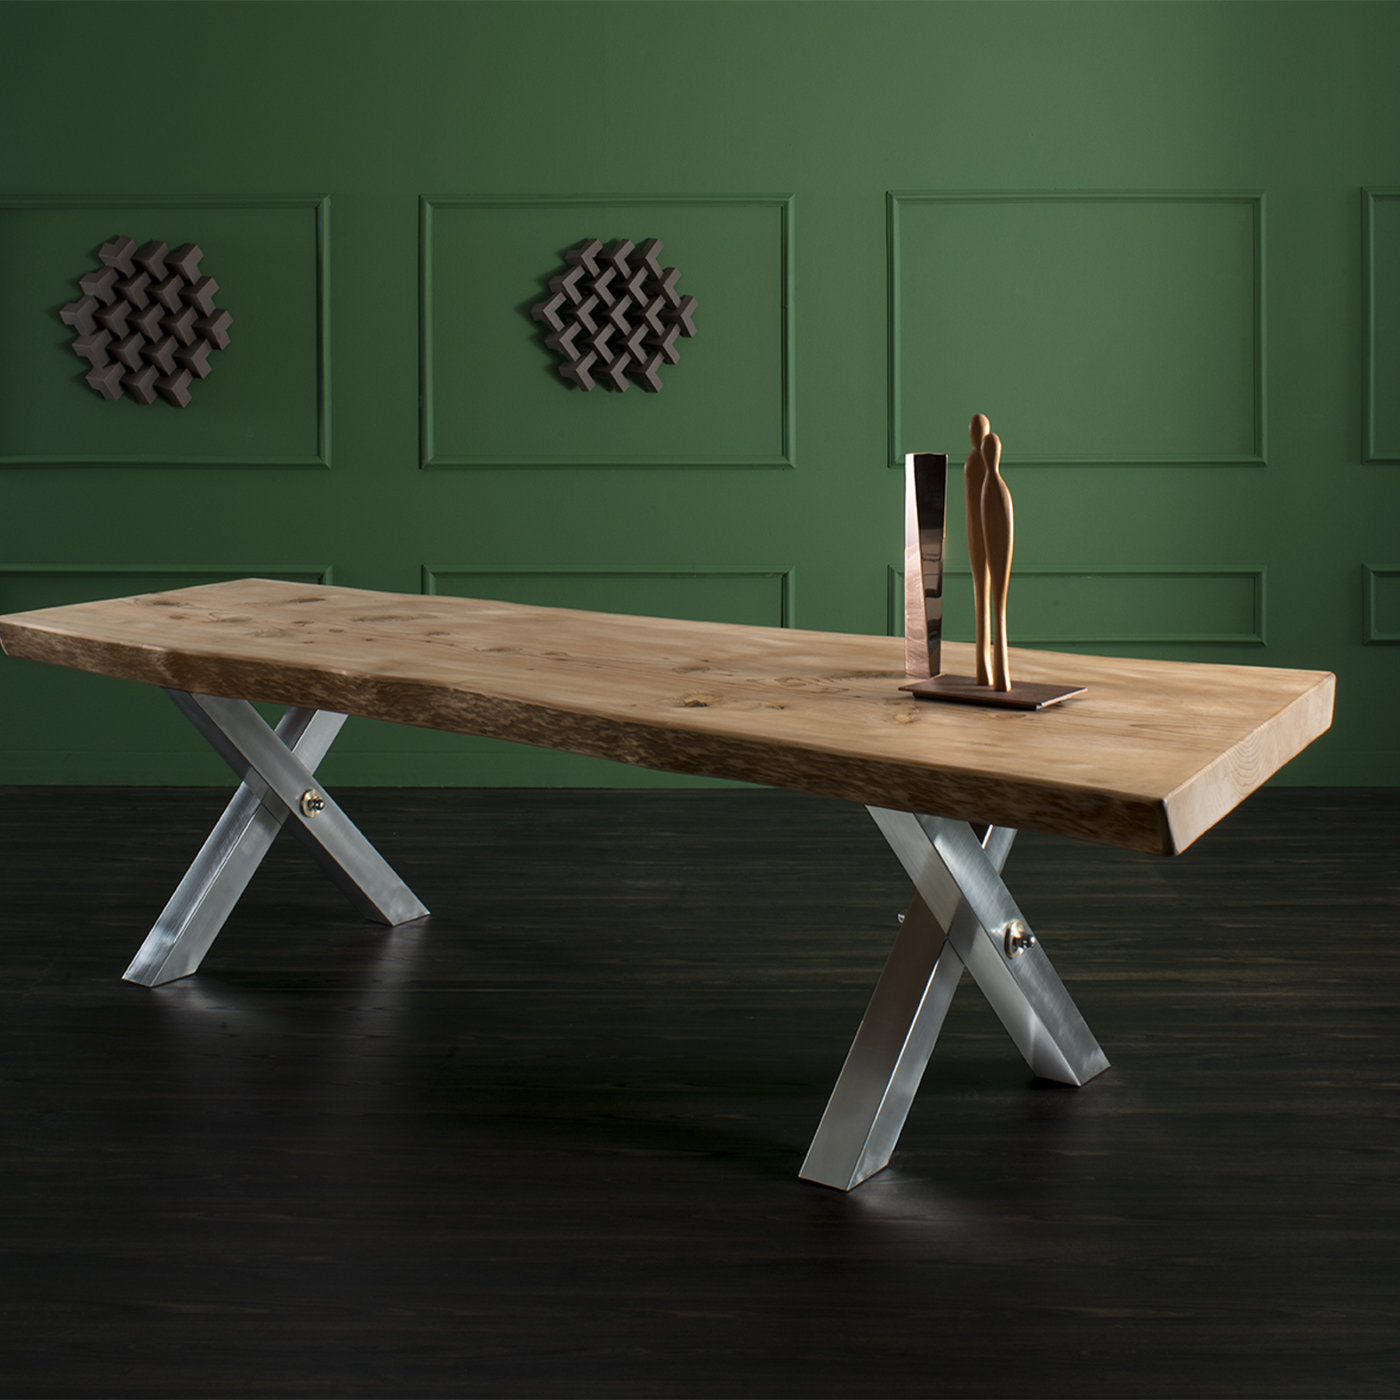 Xperx Dining Table - Alternative view 3